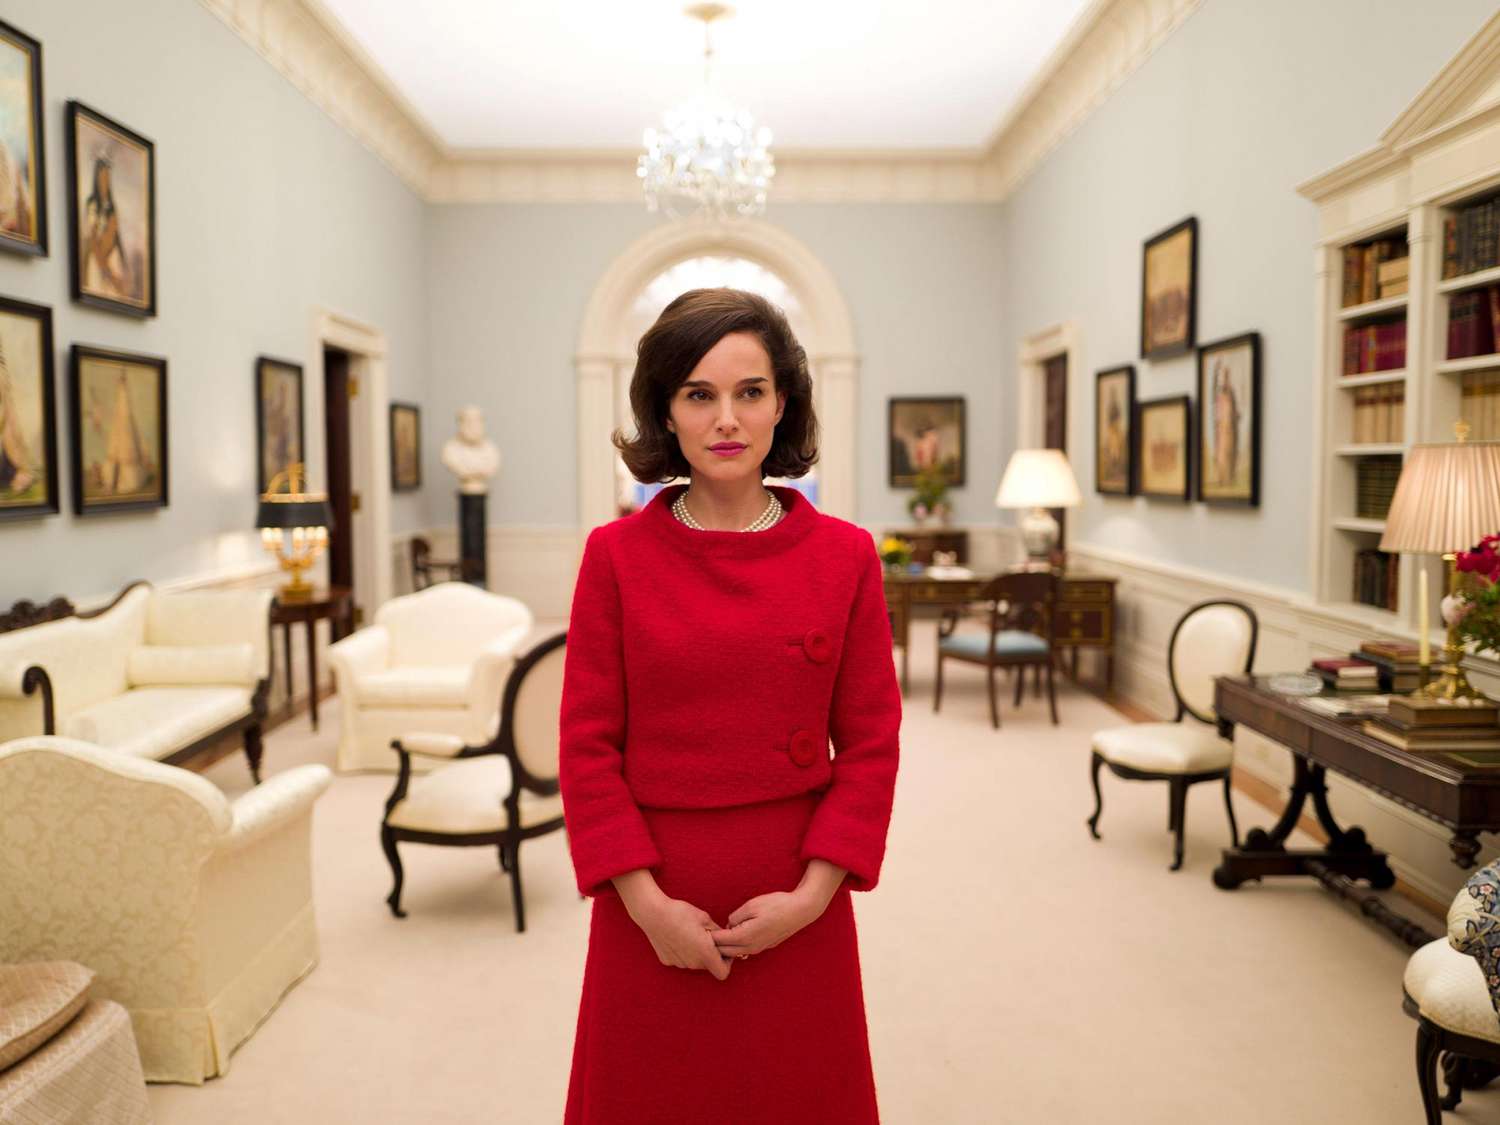 Snub: Jackie&nbsp;for Best Picture